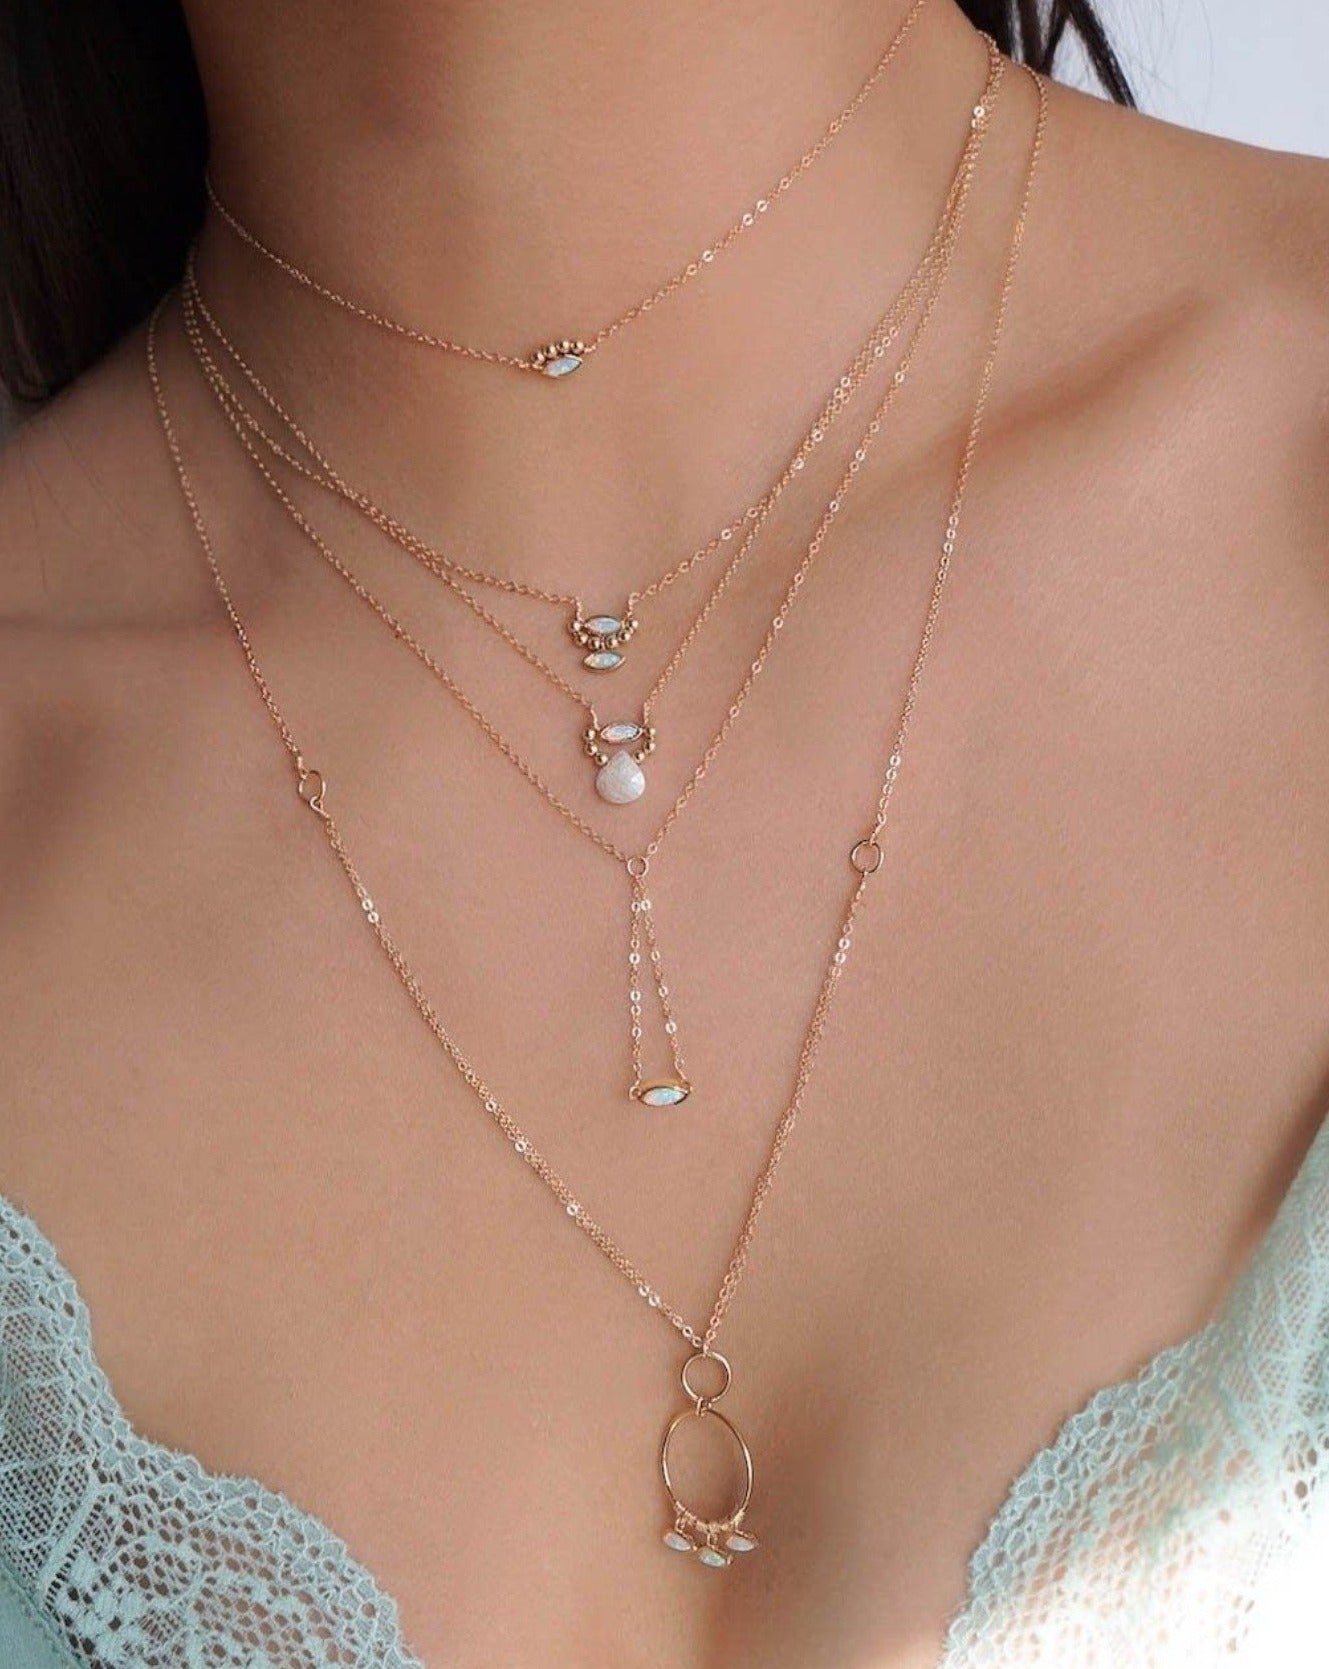 Arlan Necklace by KOZAKH. A 16 to 18 inch adjustable length, 1 inch drop lariat style necklace in 14K Gold Filled, featuring a Marquise Opal charm.